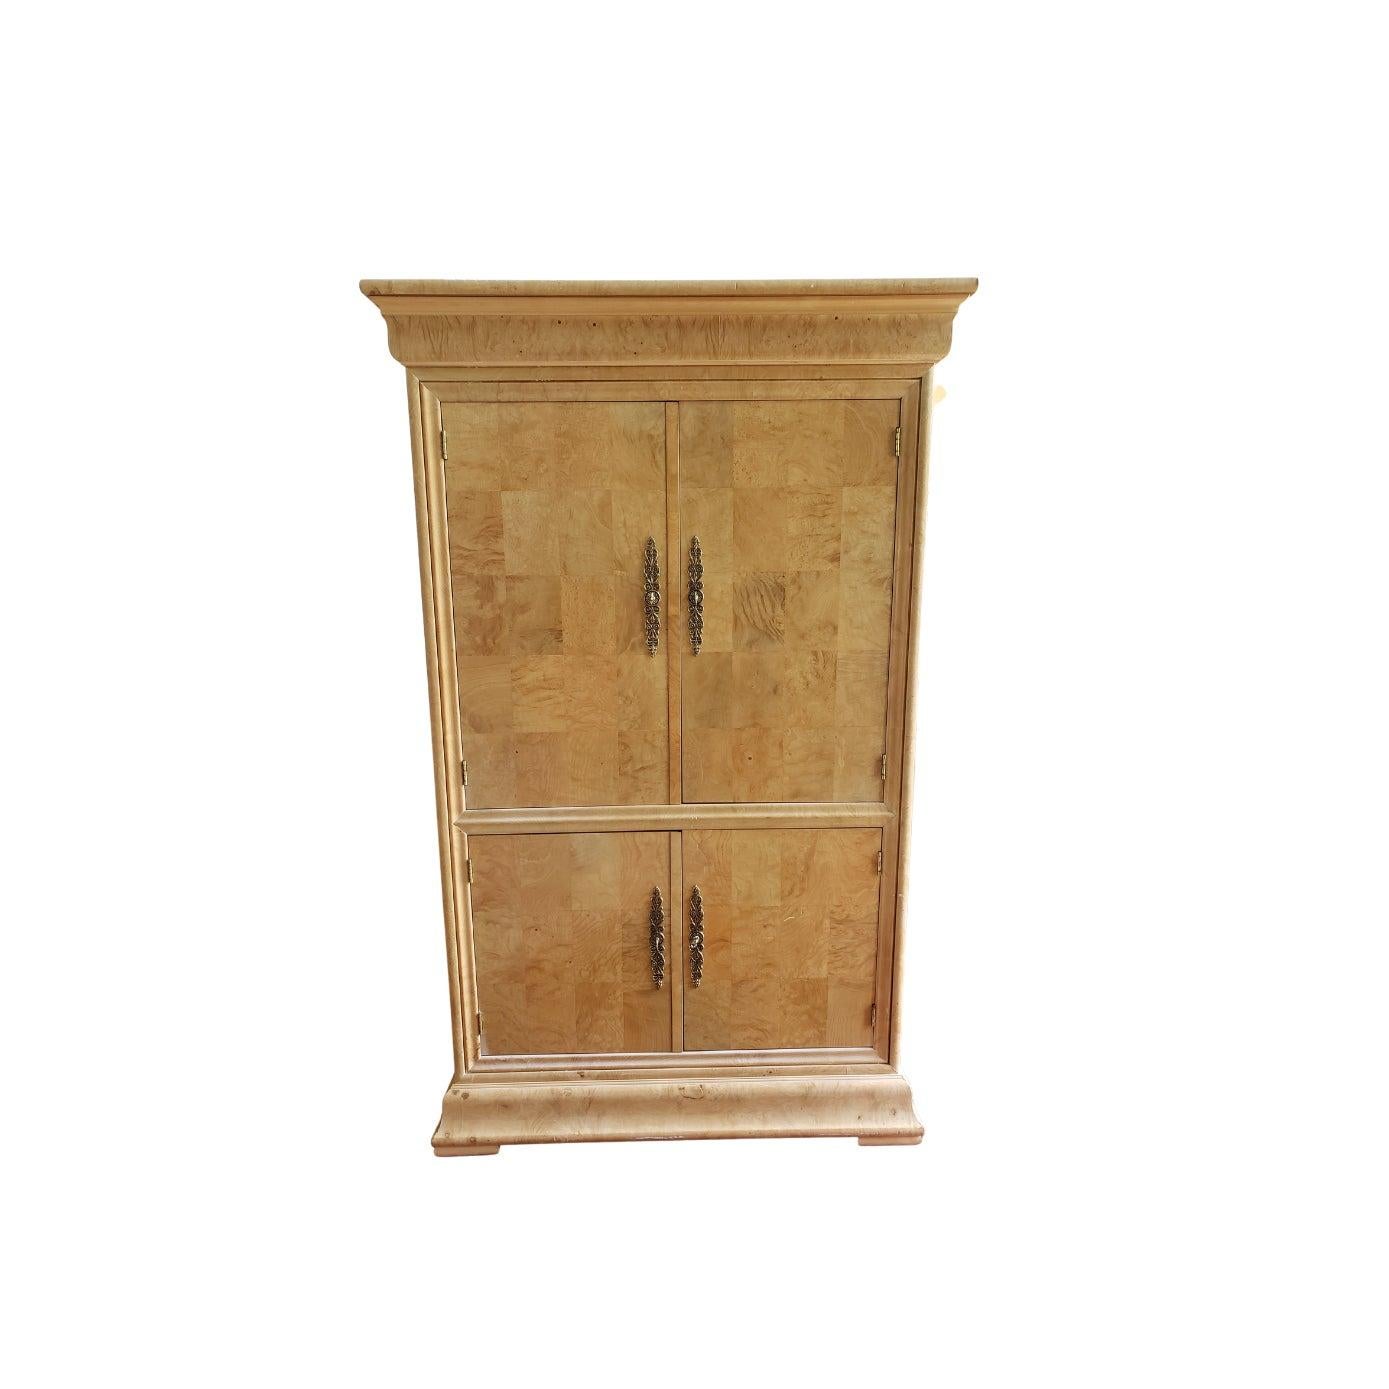 Henredon Charles X Collection burl maple triple Dresser.High quality American made burl wood with solid wood dovetail drawers. Intricatelly Bookmatch burl wood veneer. Measurements are 42W x 21D x 68H.
 